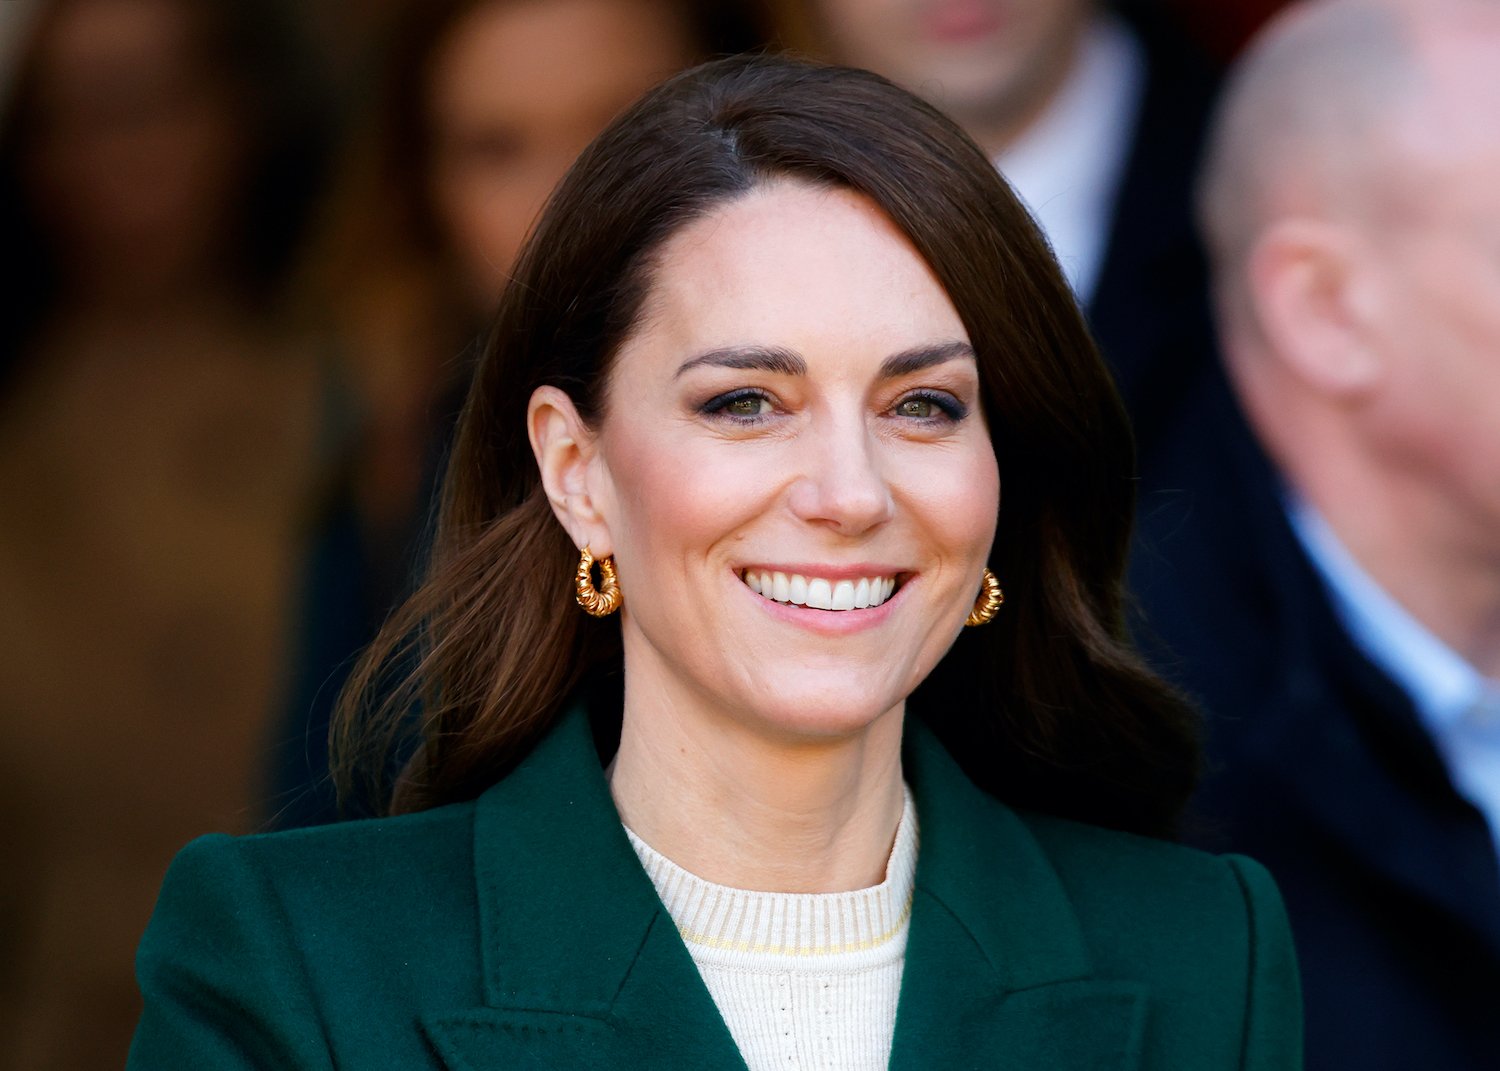 Kate Middleton calmed a nervous fan who asked for a selfie during her appearance in Leeds